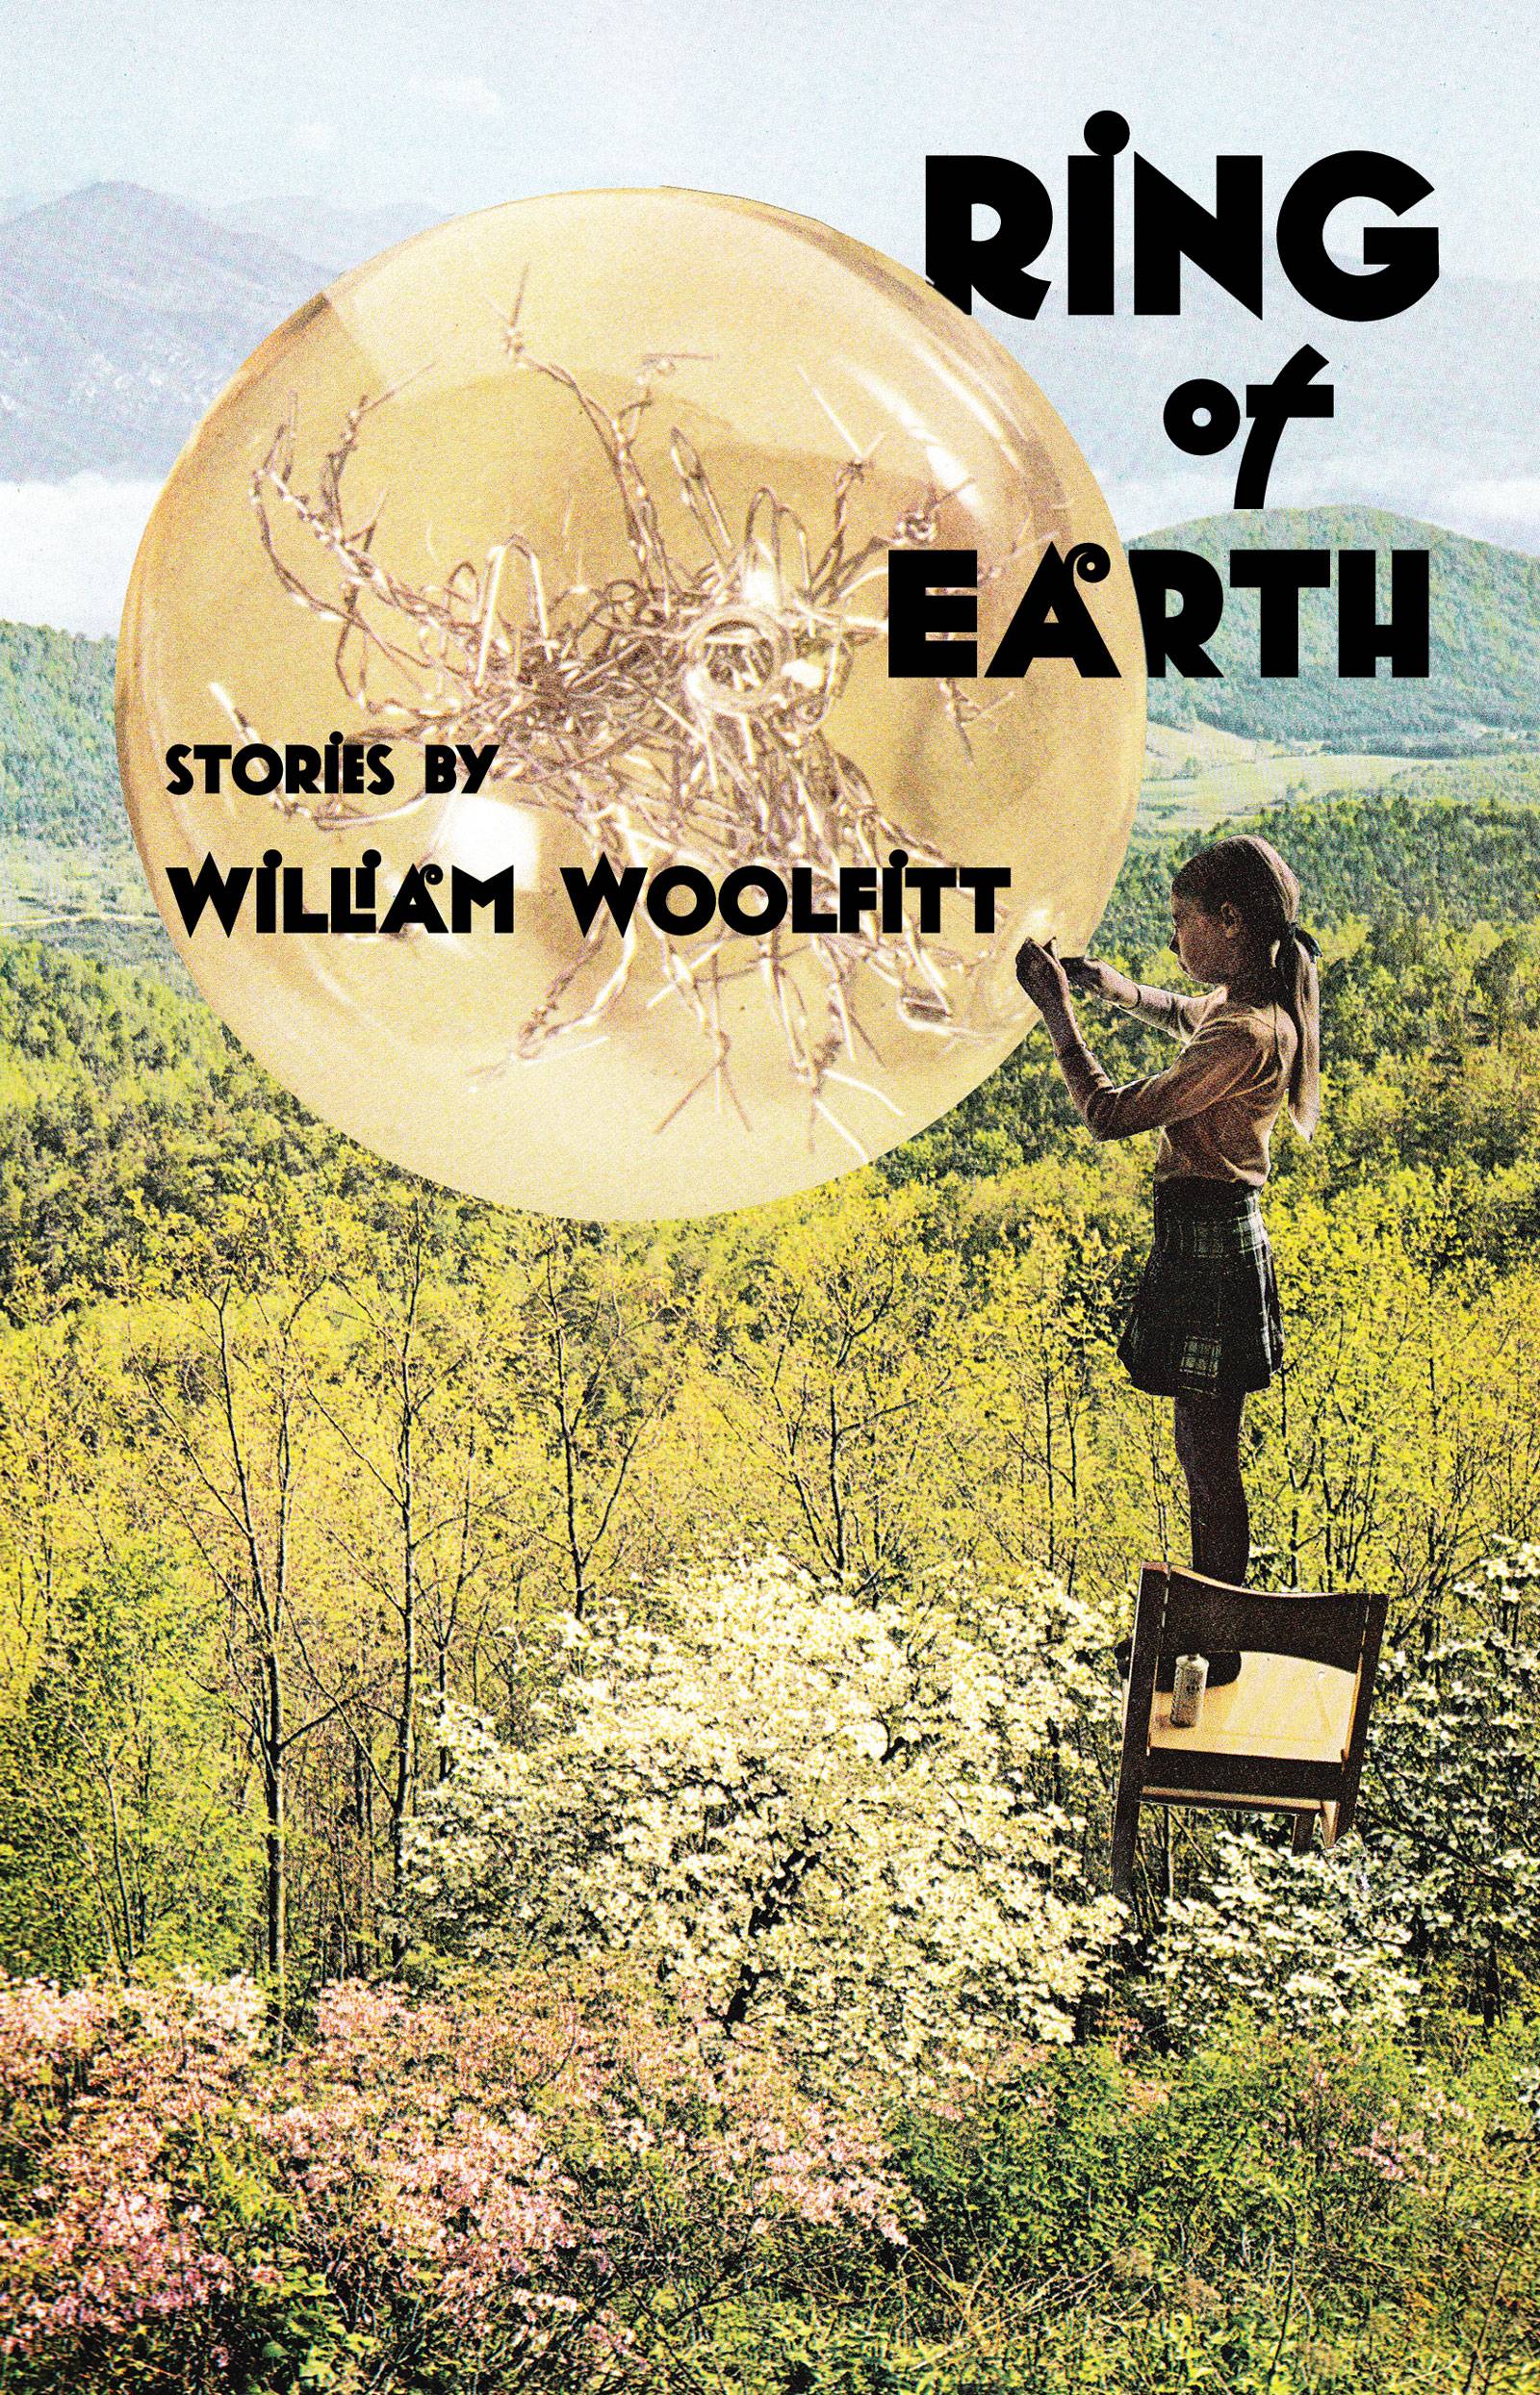 Ring of Earth: Stories by William Woolfitt shows a girl standing on a chair on a hillside field of wildflowers with mountains in the distance. The girl is doing something to try and mend a large amber bubble that is floating in front of her.